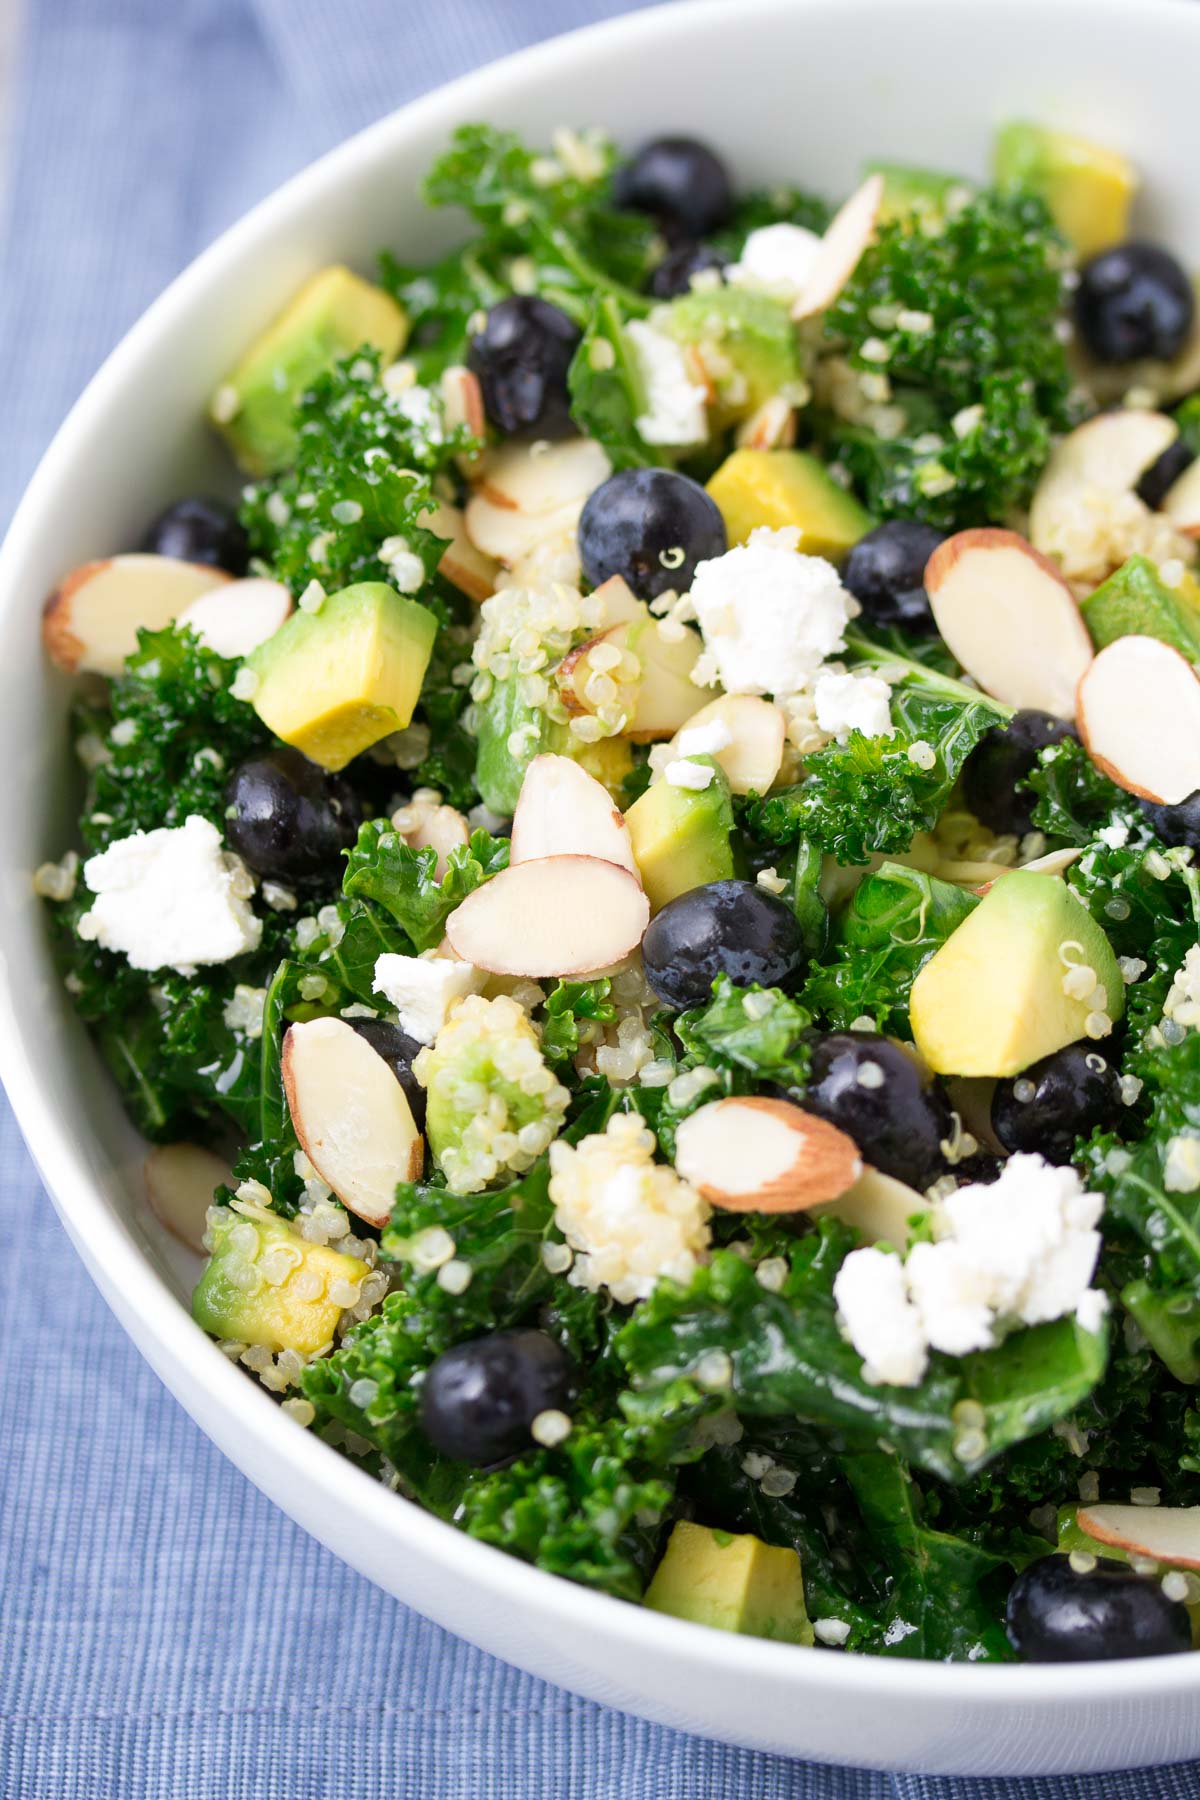 Kale Avocado Salad with quinoa and blueberries in a white bowl.